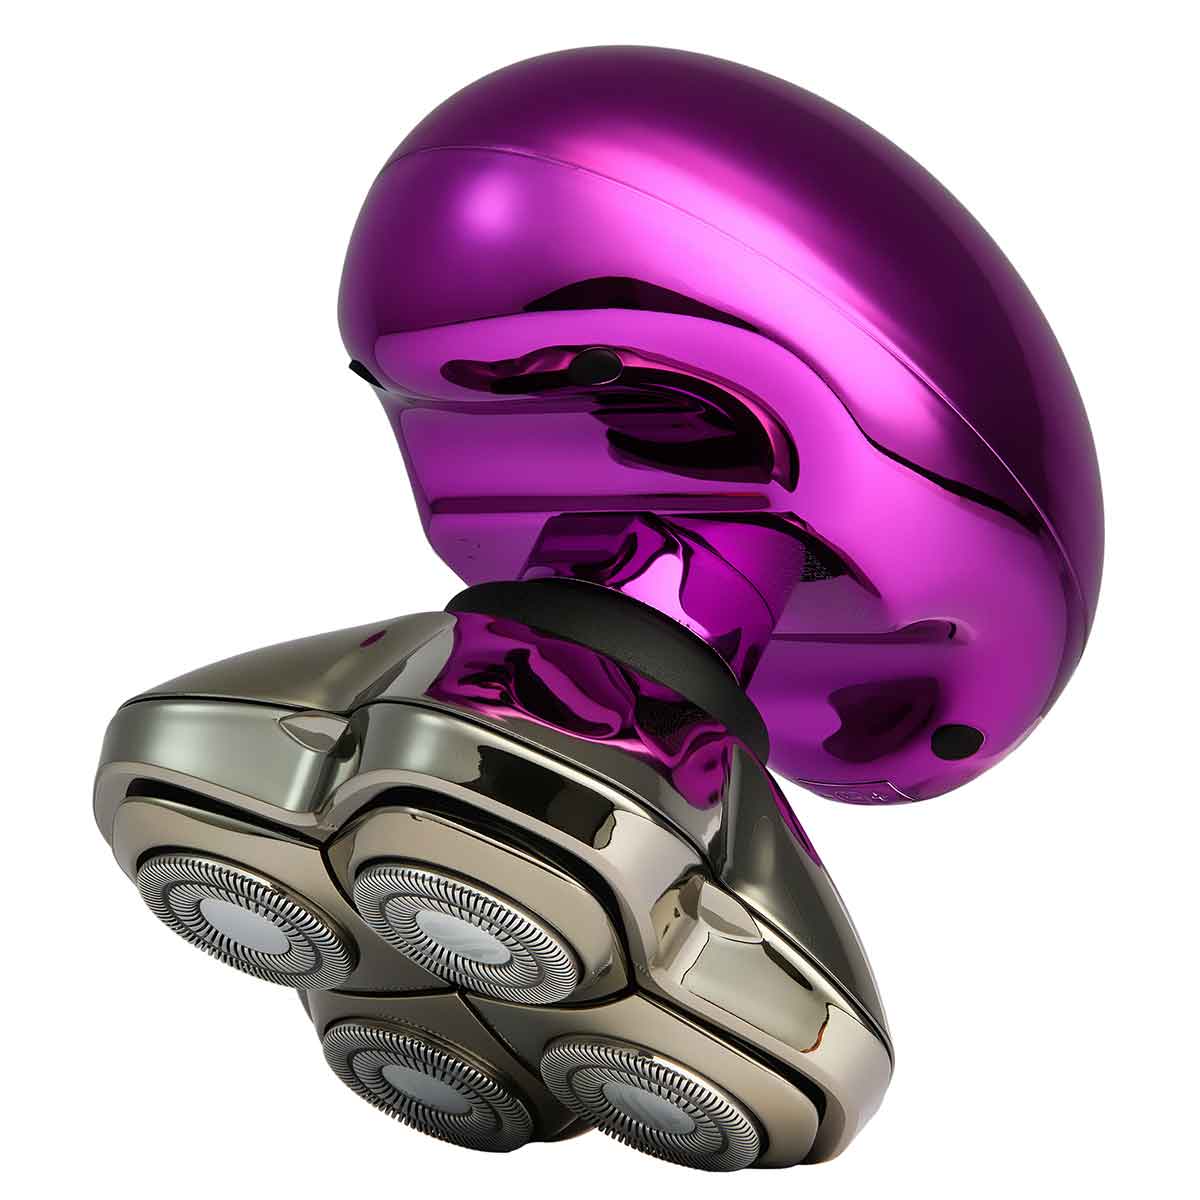 The Purple Butterfly Kiss Pro is an innovative shaver designed for precise and efficient grooming. Experience exceptional shaving performance with this stylish and effective device.